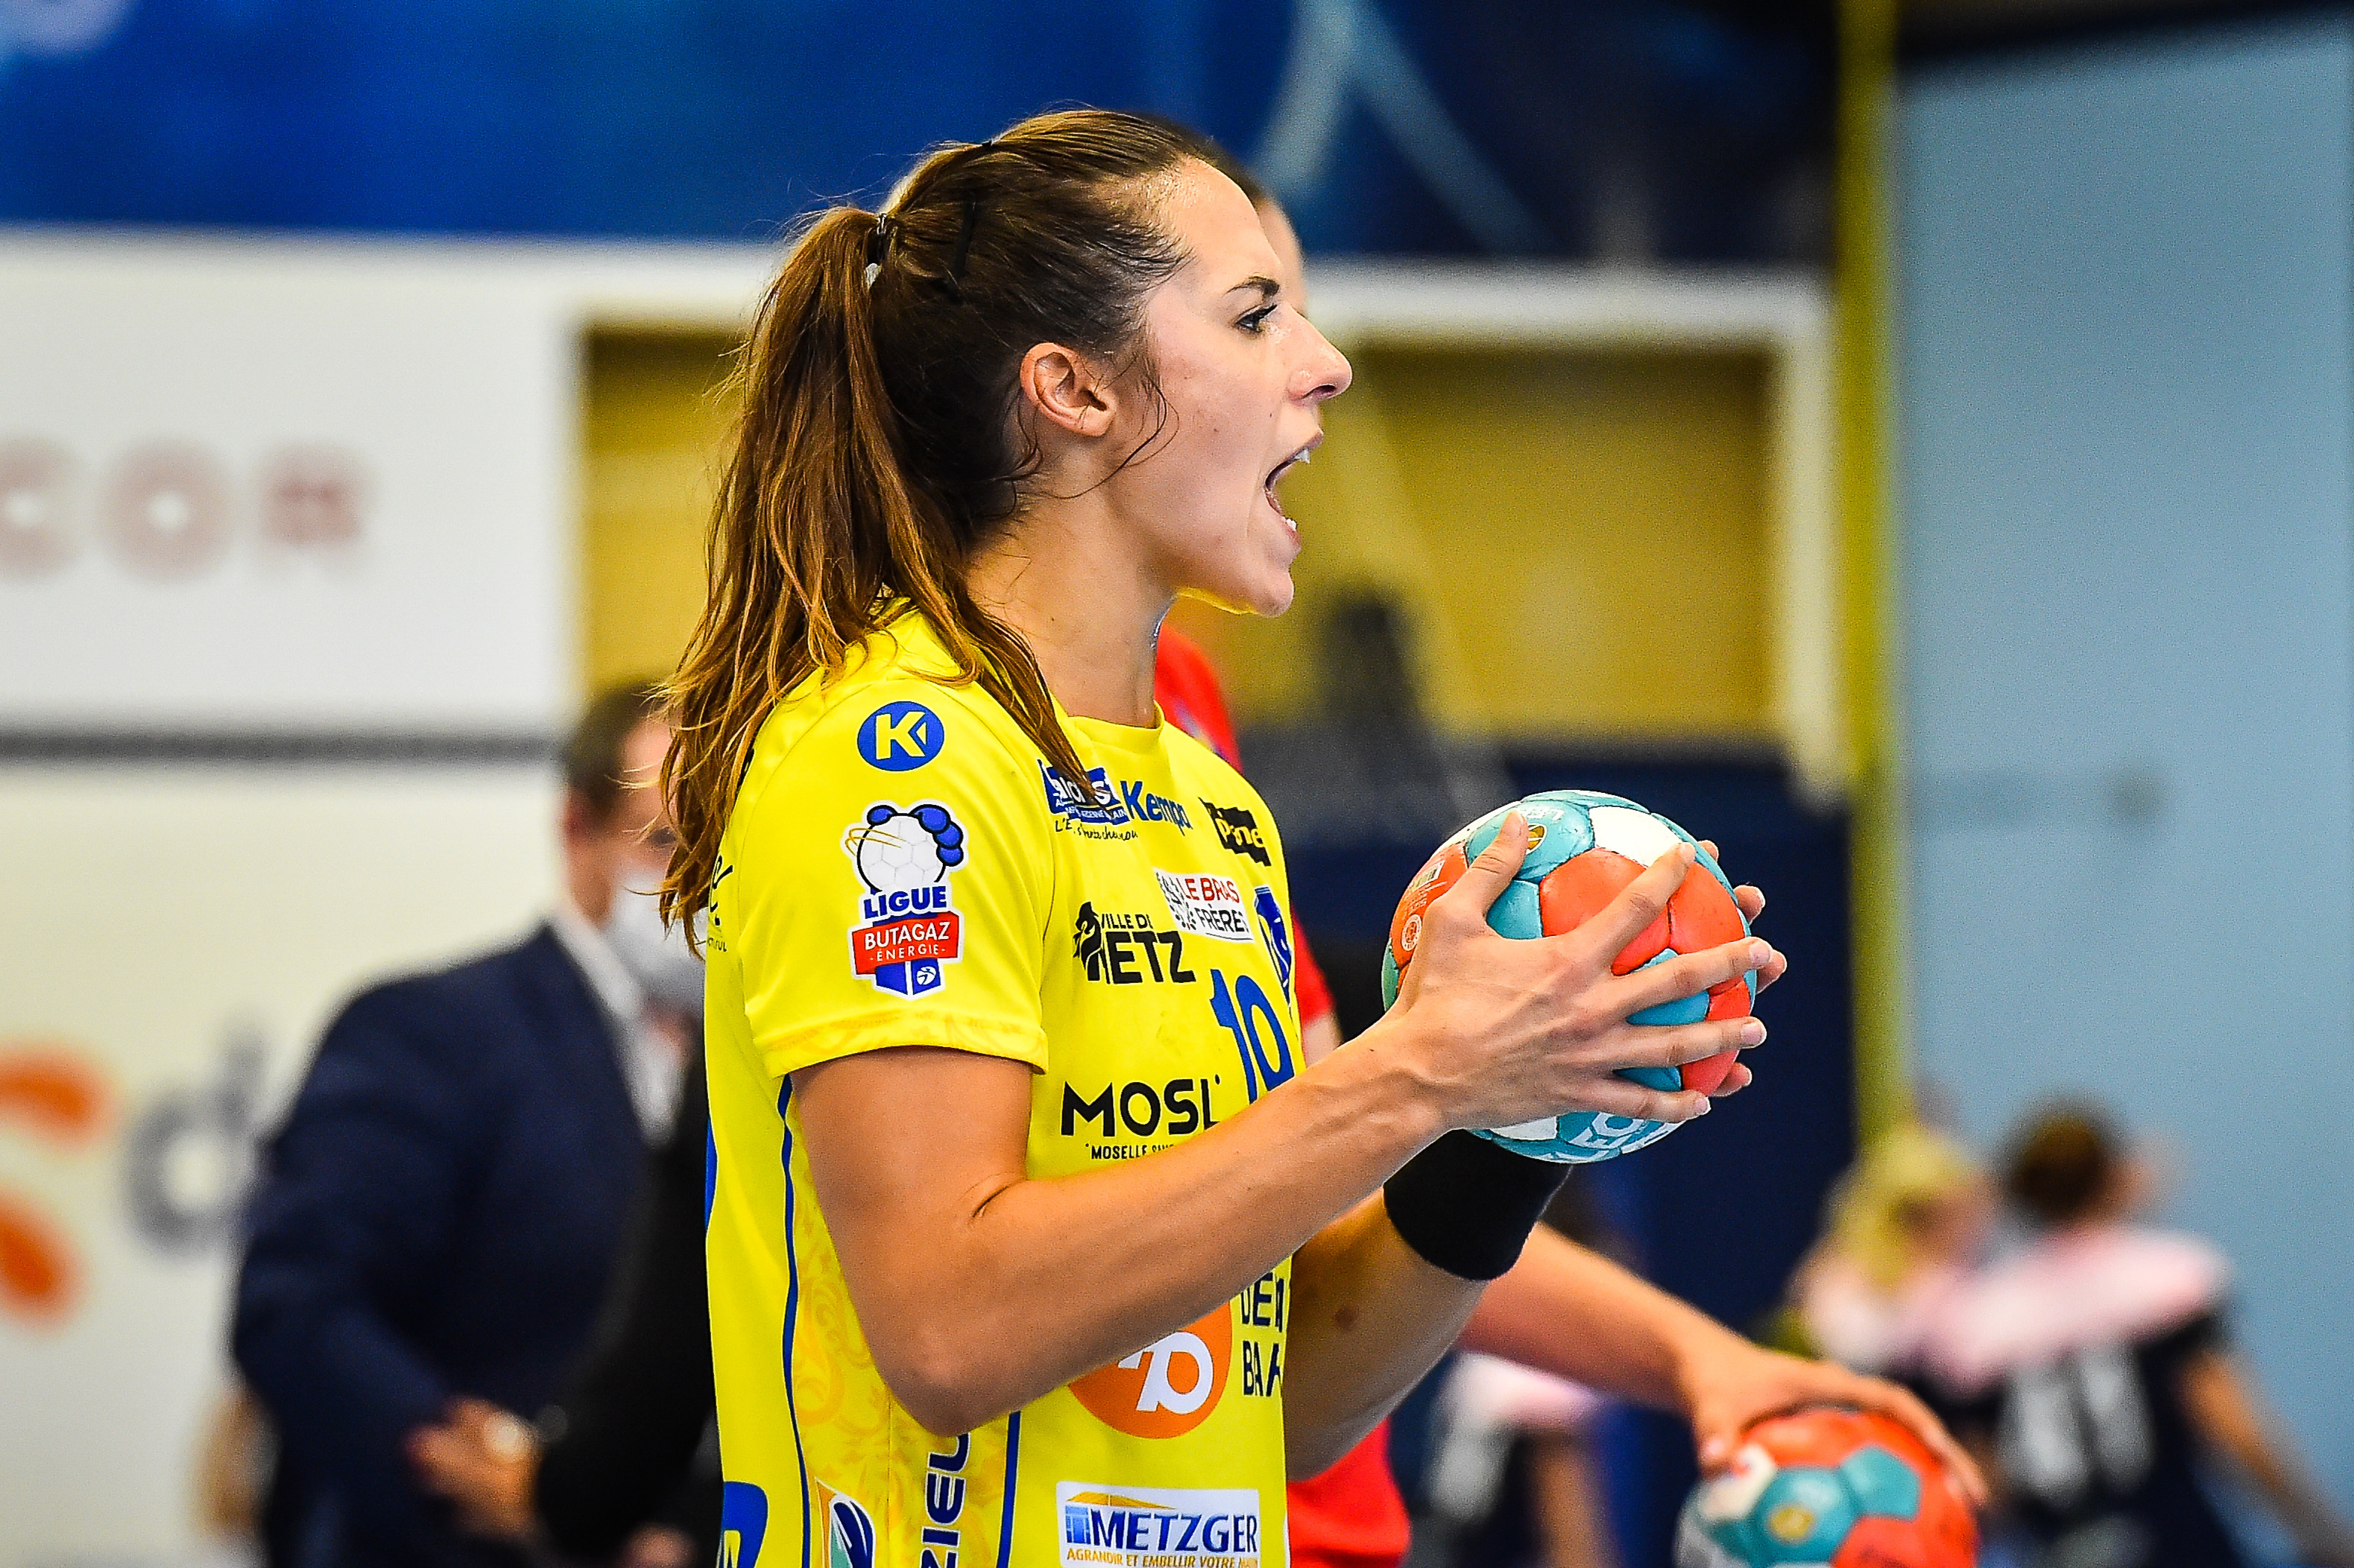 Louise BURGAARD of Metz during the Ligue Butaguaz Energie match between Chambray and Metz on September 15, 2021 in Chambray-les-Tours, France. (Photo by Matthieu Mirville/Icon Sport) - Louise BURGAARD -  (France)